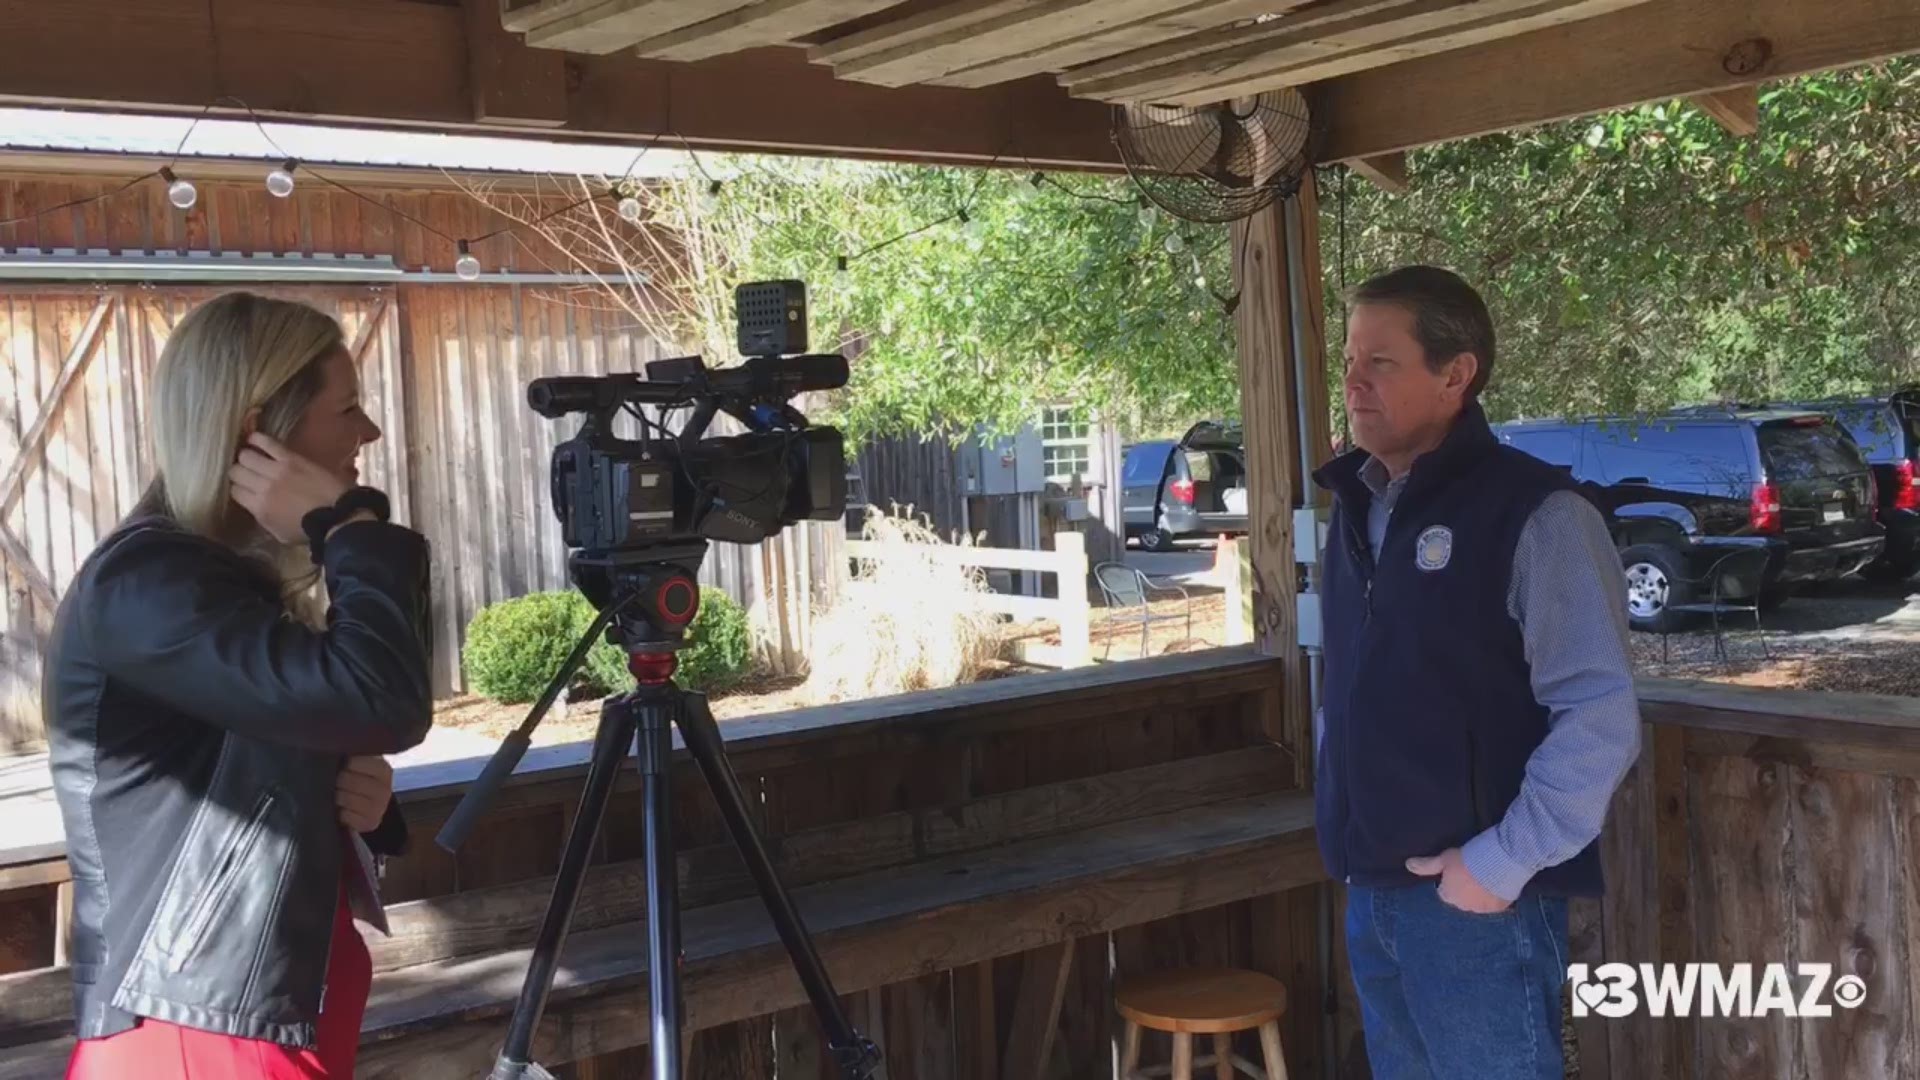 Reporter Chelsea Beimfohr has an exclusive one-on-one interview with Governor-elect Brian Kemp on his victory tour to talk about his goals once in office